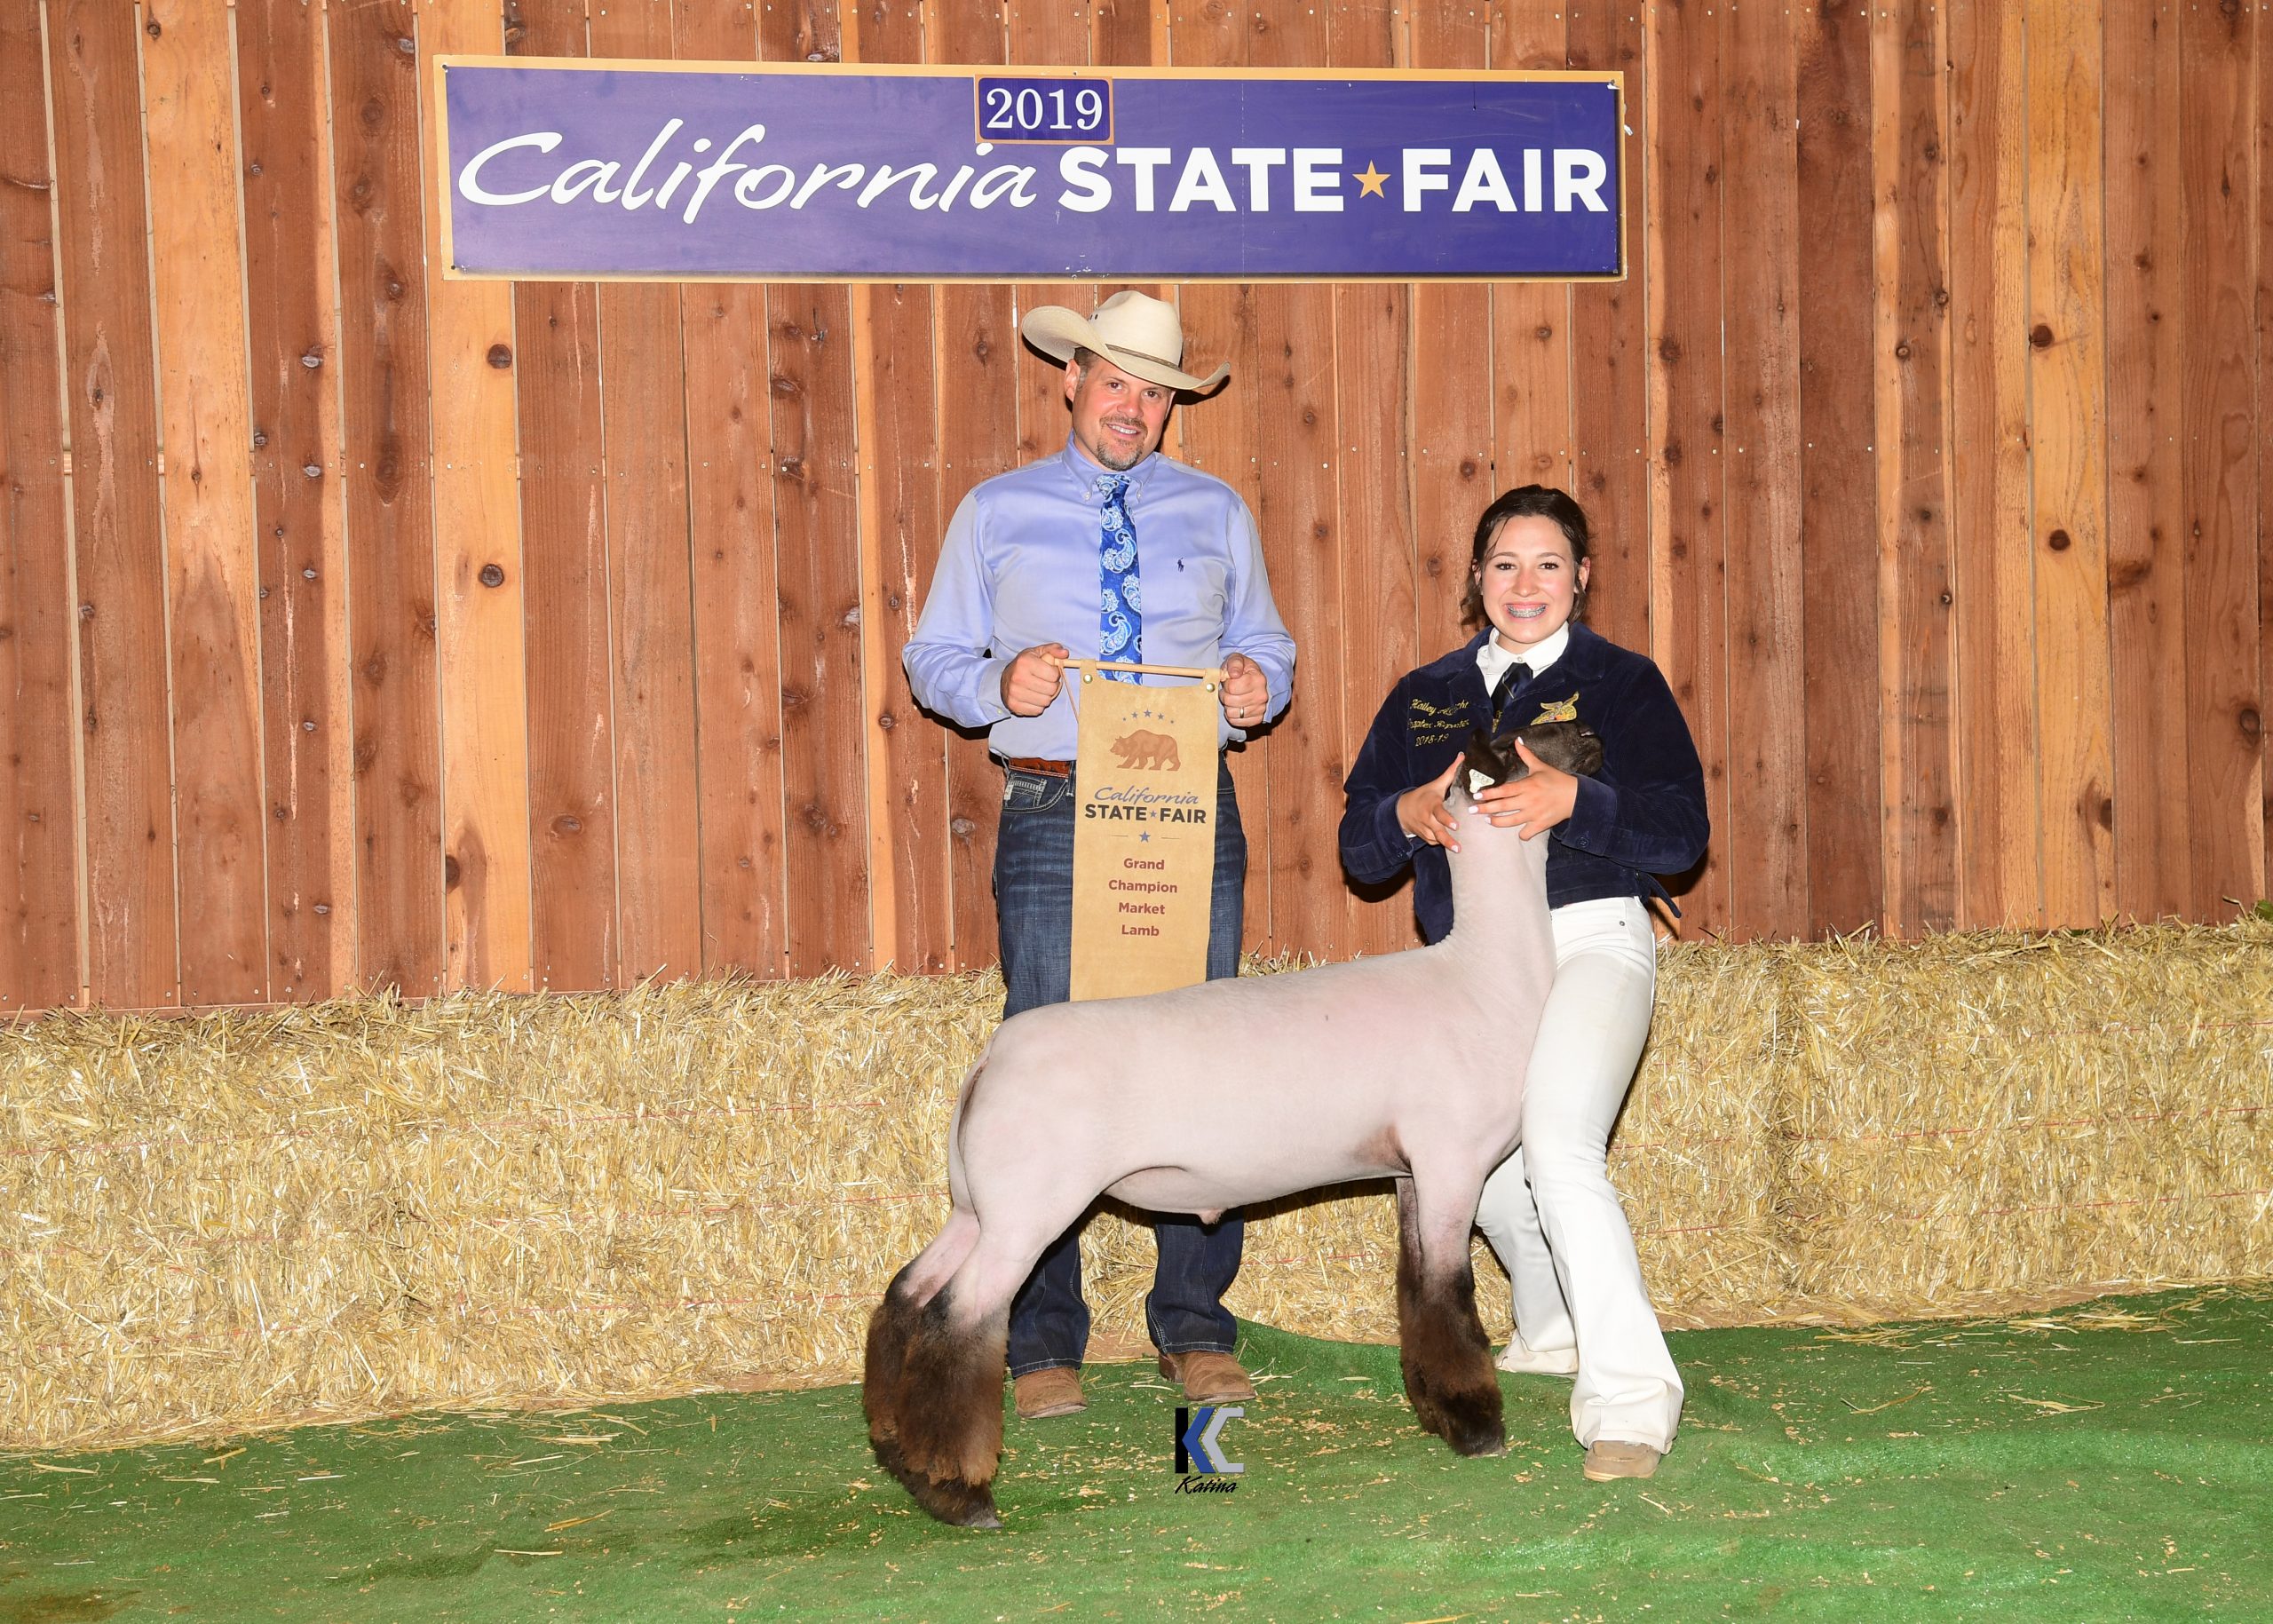 Grand Champion Market Lamb and Exhibitor with Judge